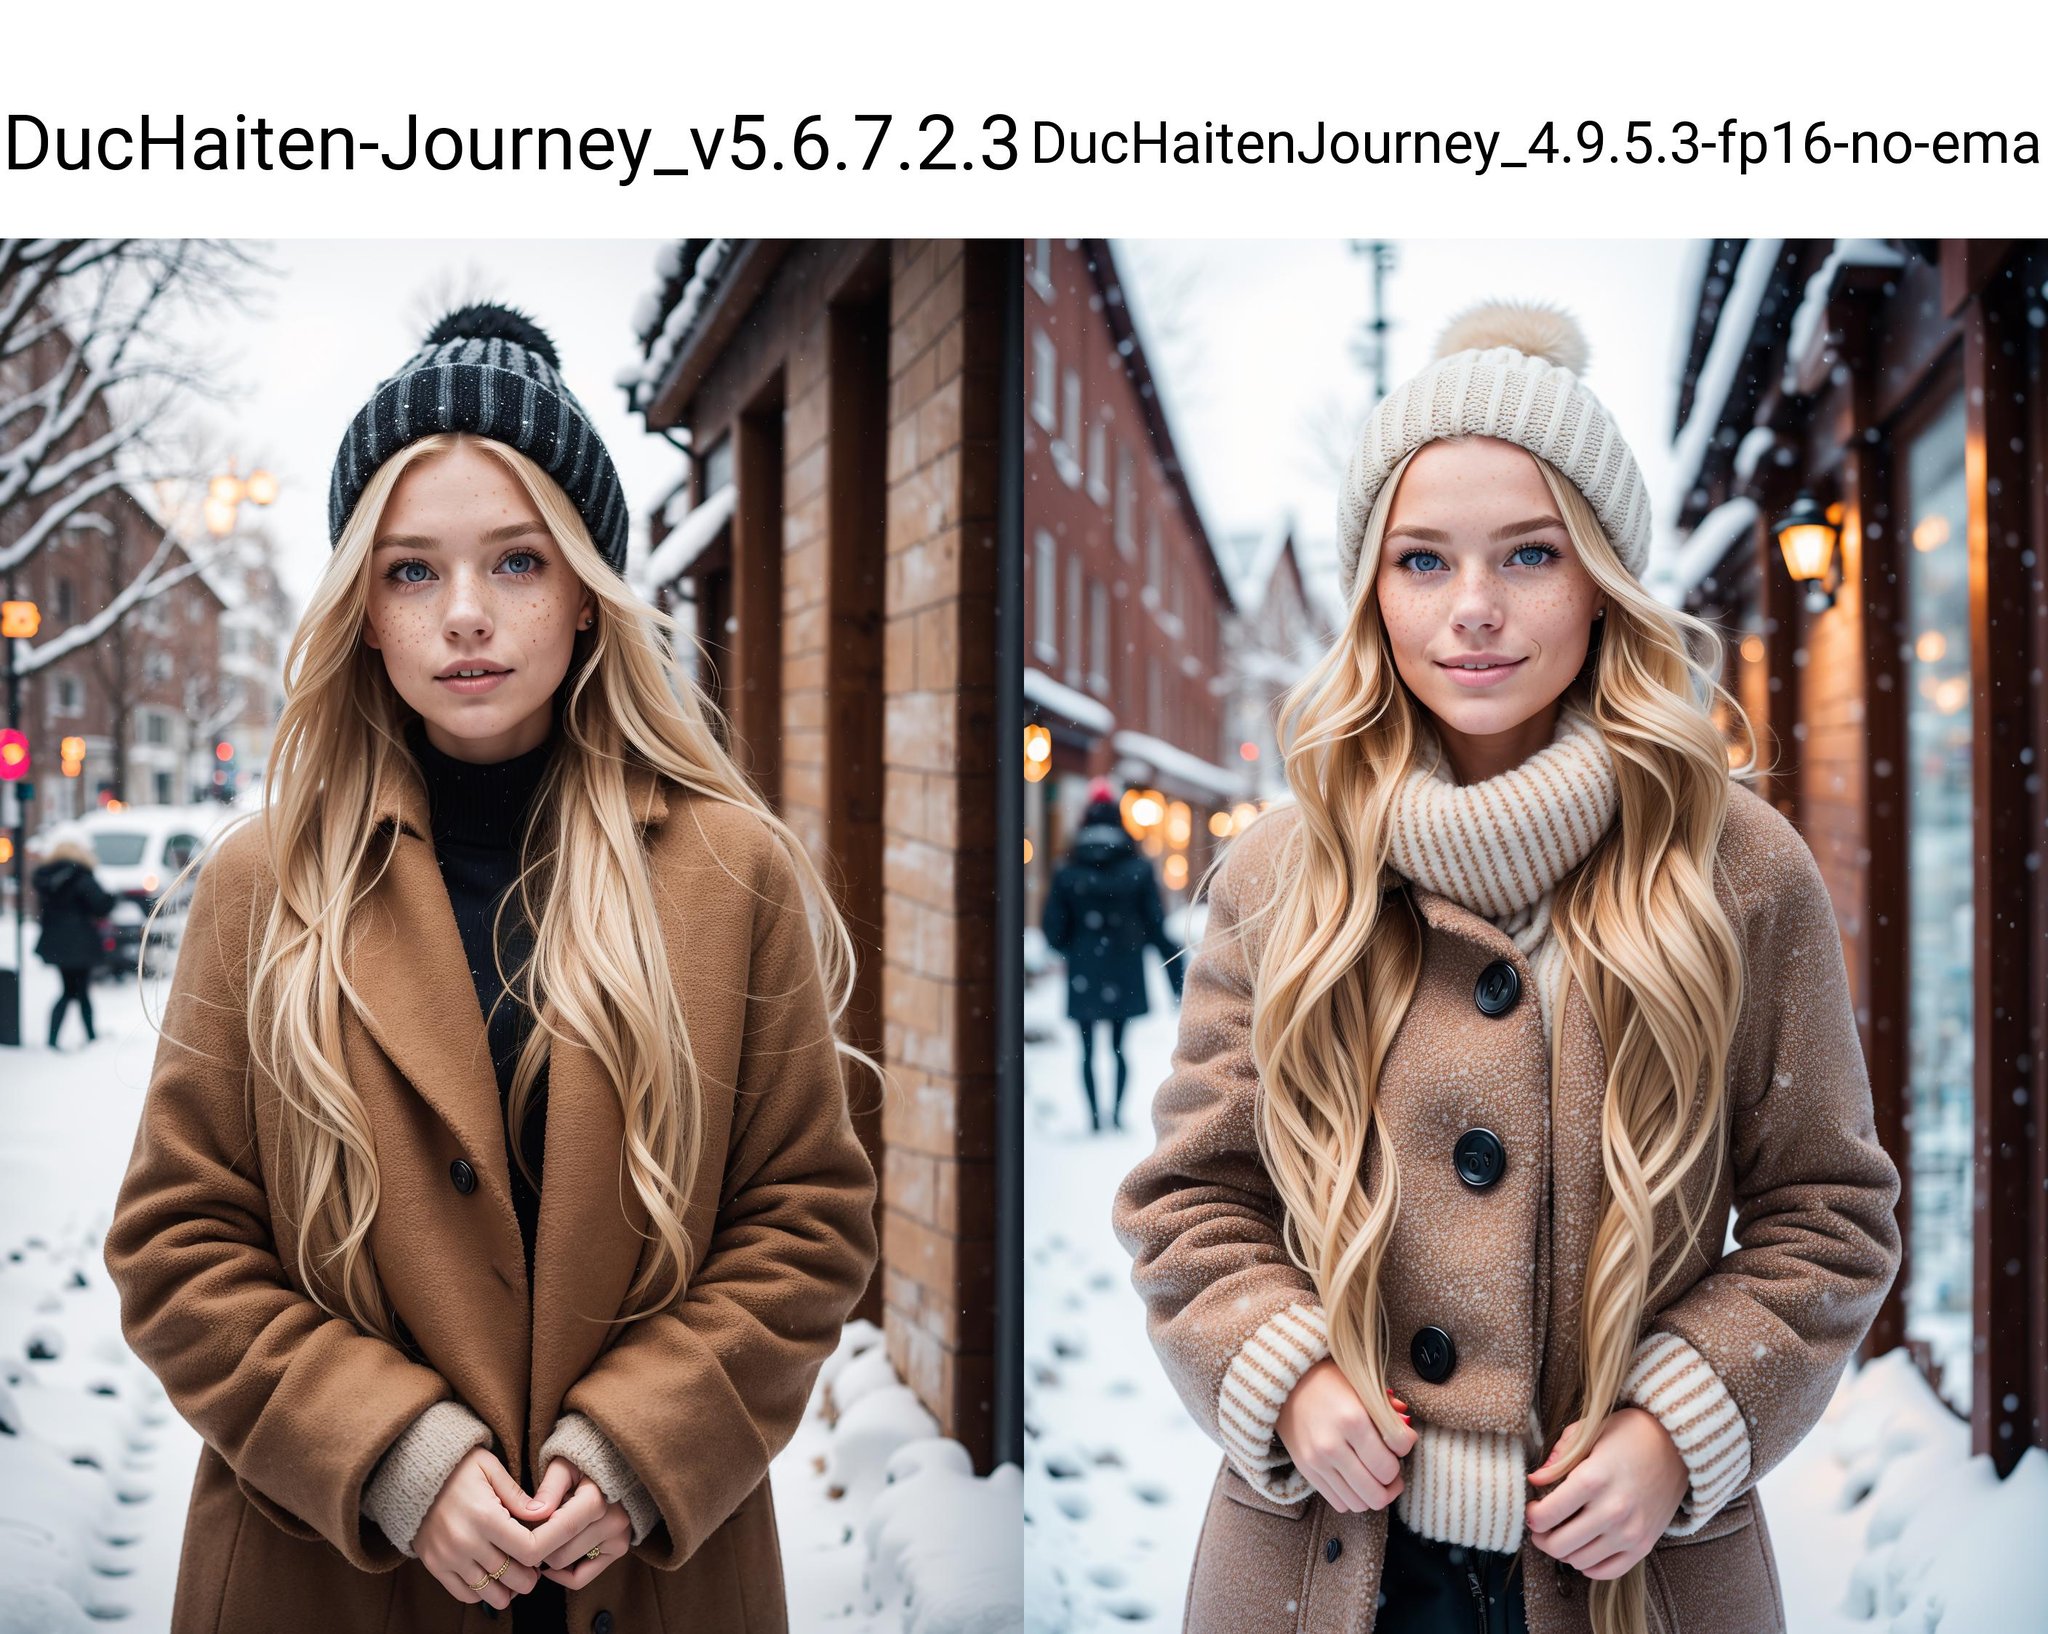 professional portrait photograph of a gorgeous Norwegian girl in winter clothing with long wavy blonde hair, sultry flirty look, freckles, gorgeous symmetrical face, cute natural makeup, wearing elegant warm winter fashion clothing, standing outside in snowy city street